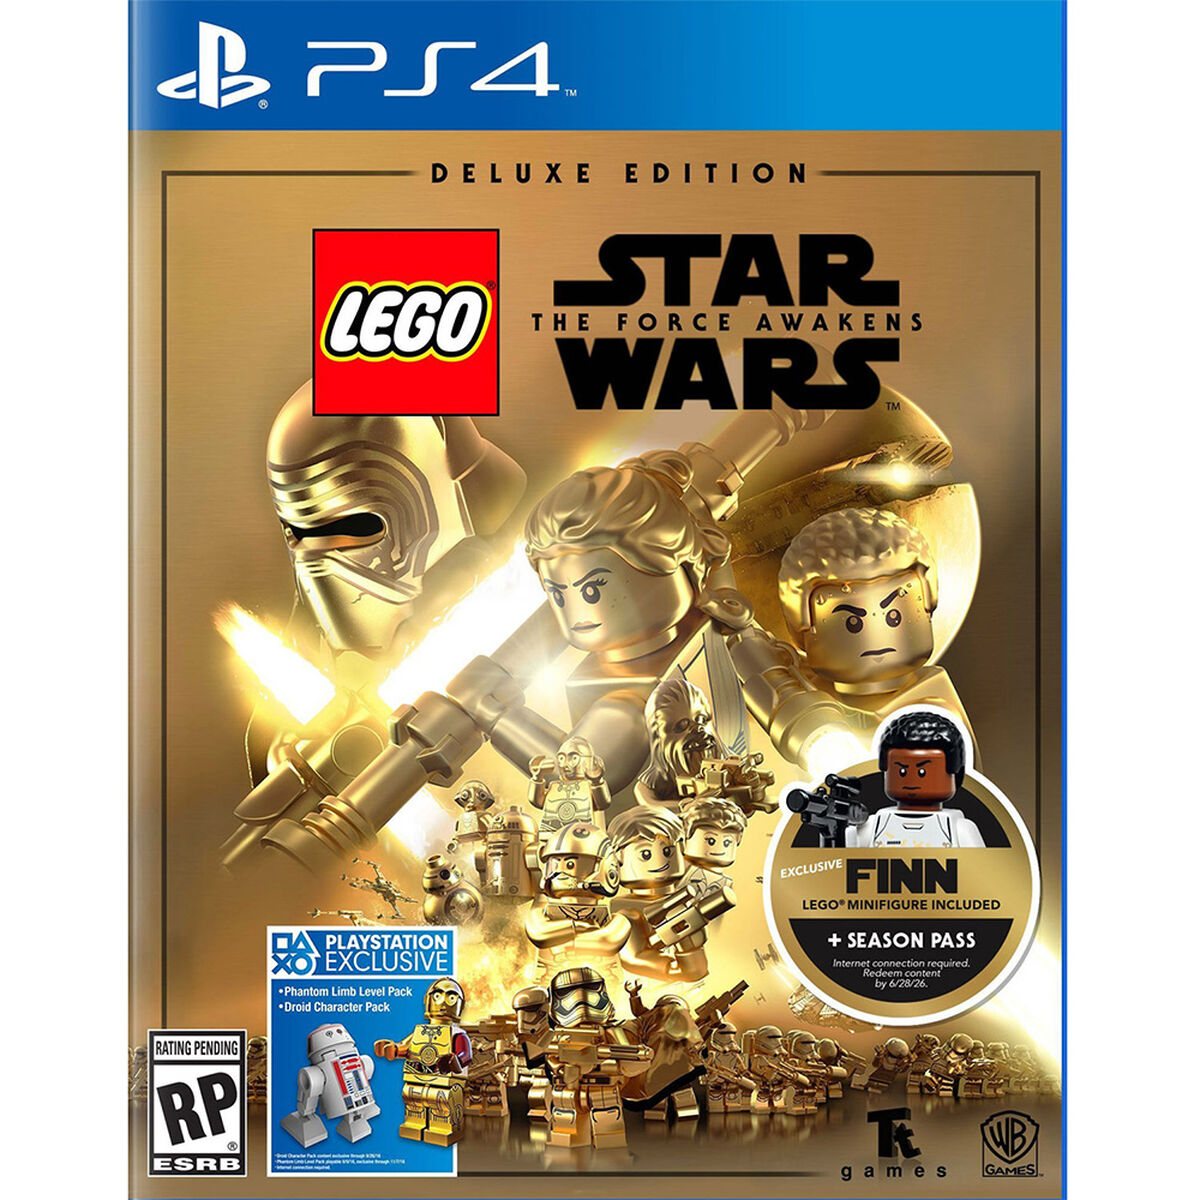 Juego Playstation 4 Lego Star Wars: Force Awakens Deluxe Edition